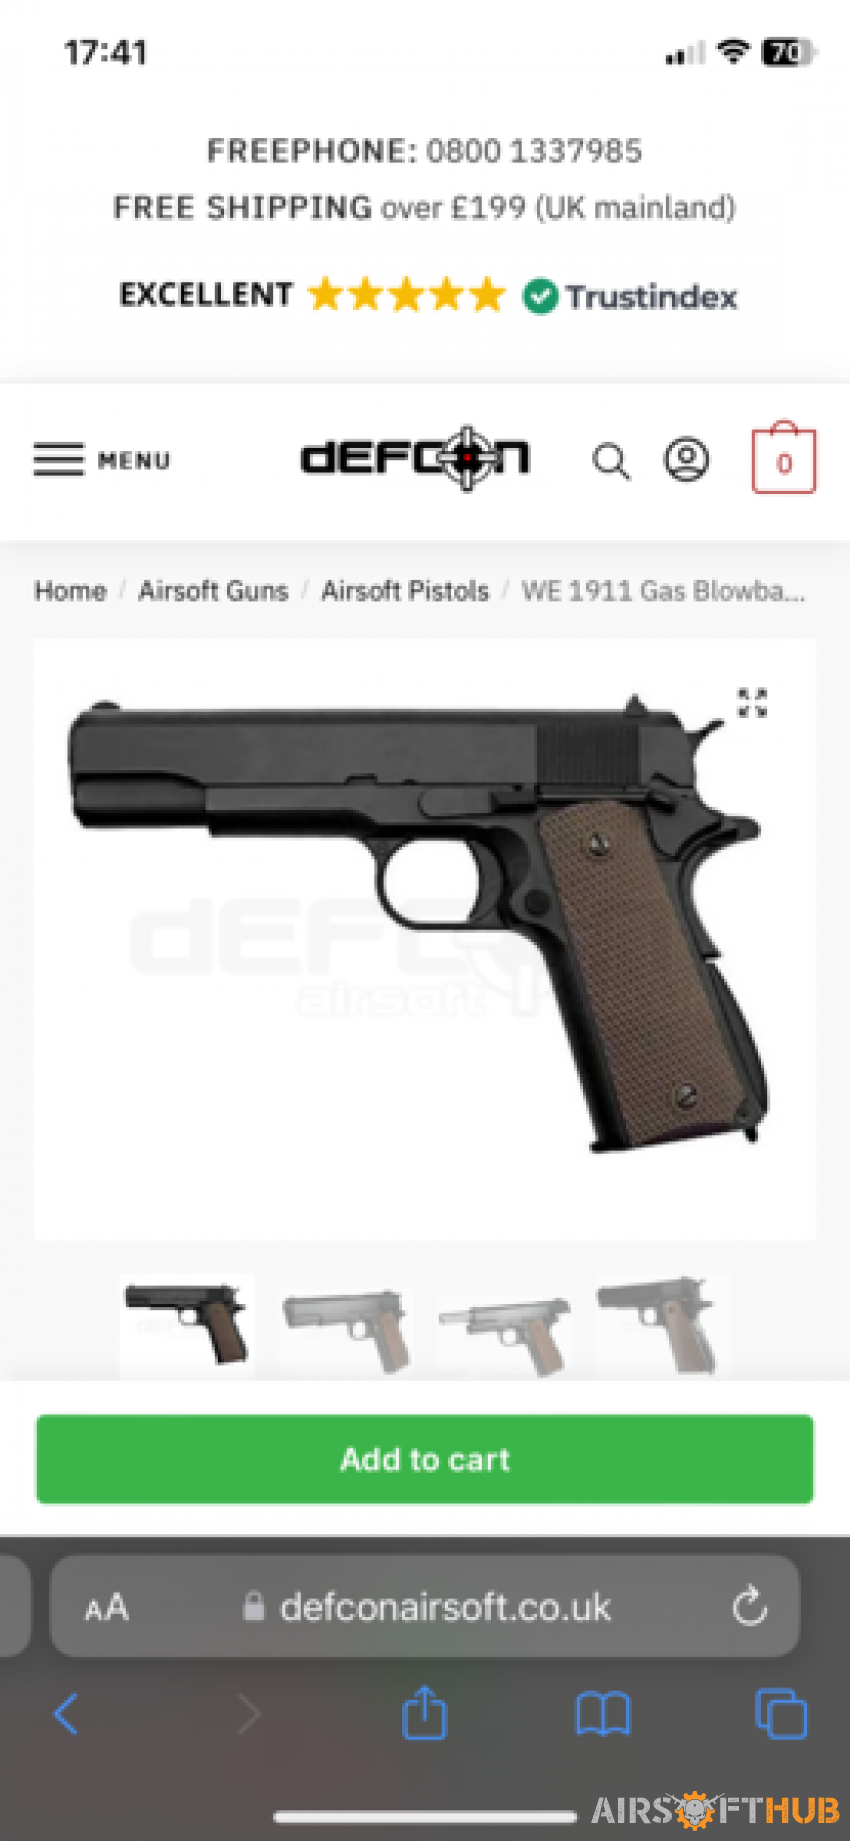 Cheap pistol wanted - Used airsoft equipment